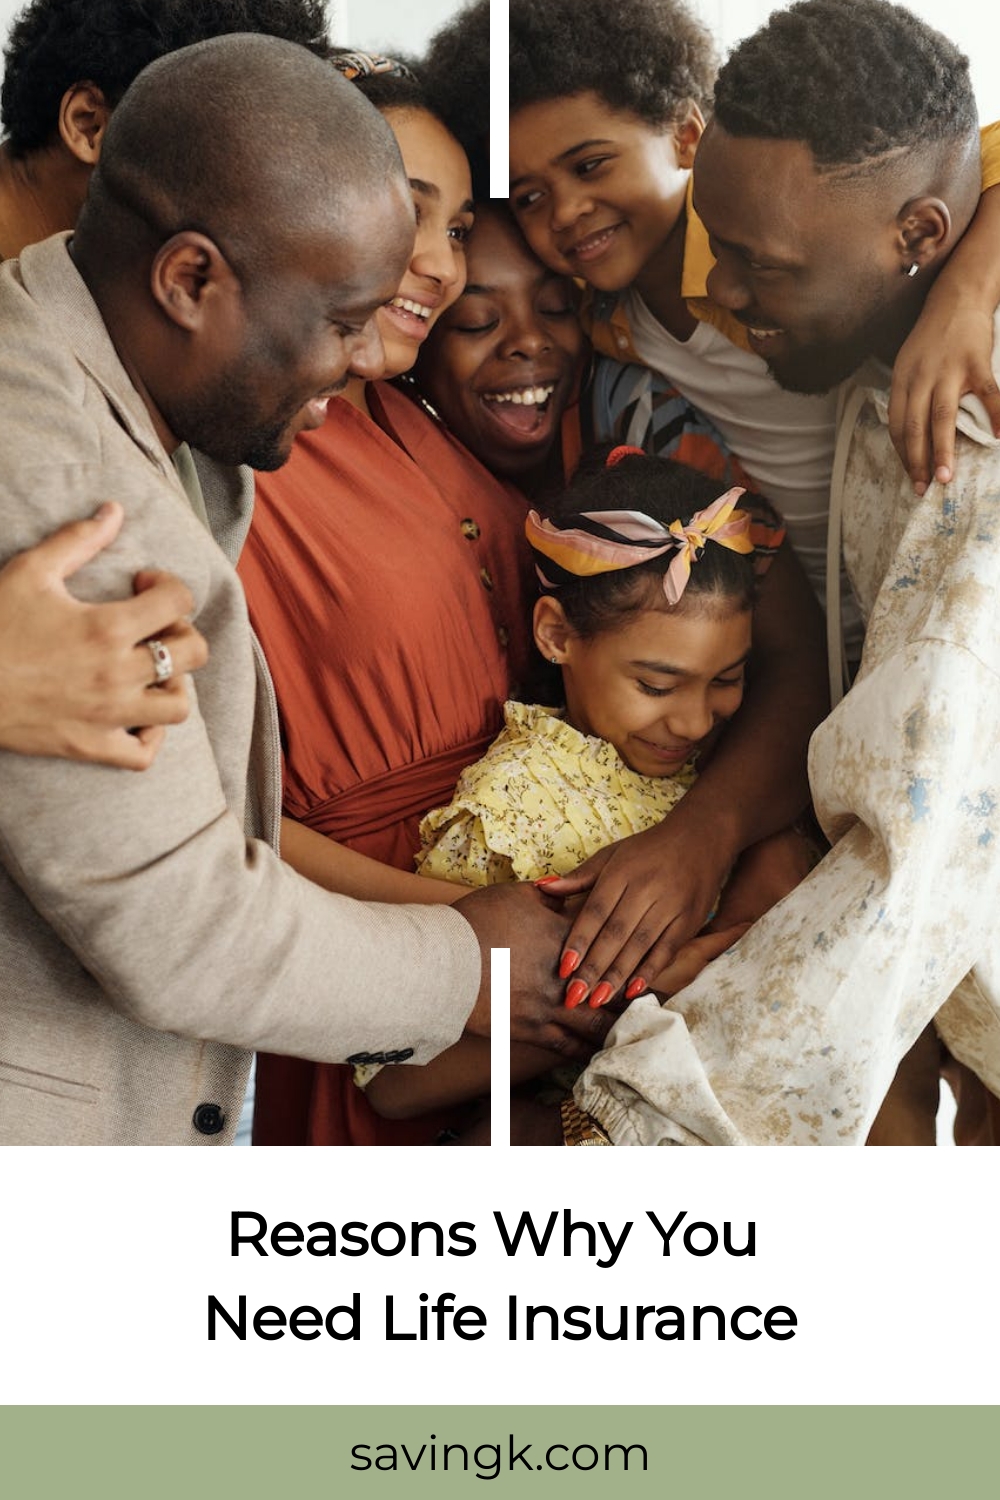 Reasons Why You Need Life Insurance